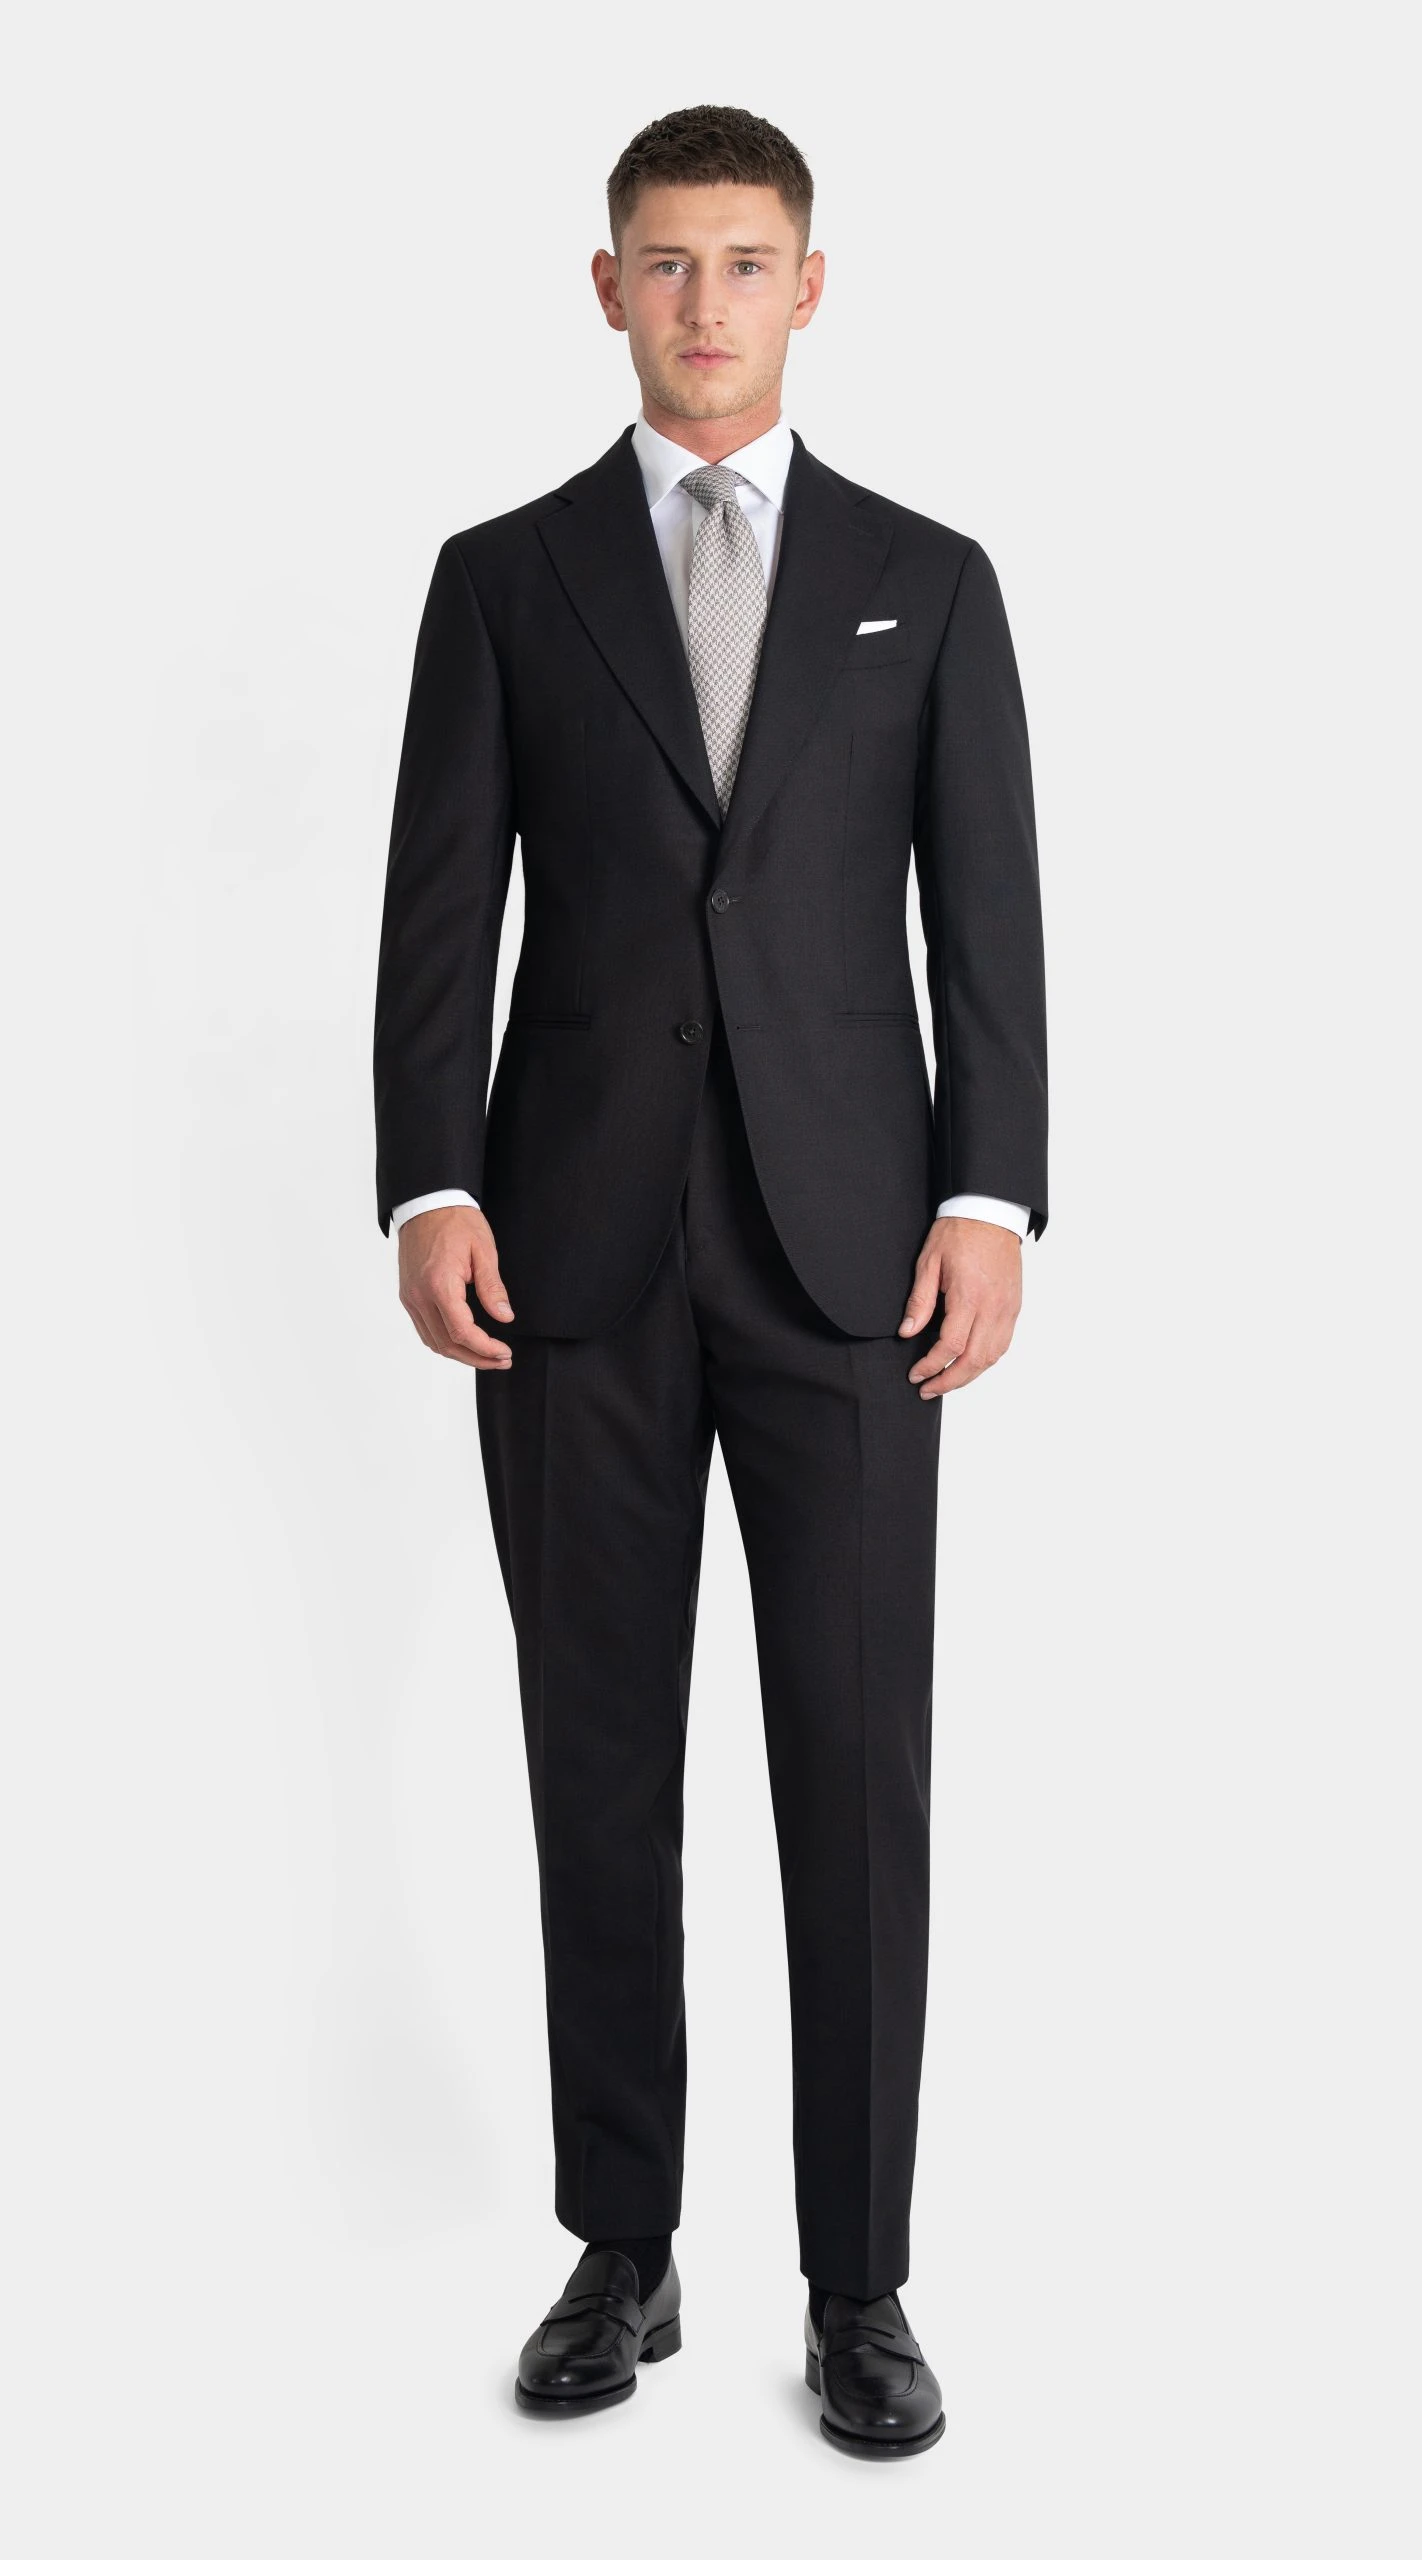 NEW black suit in twistair fabric